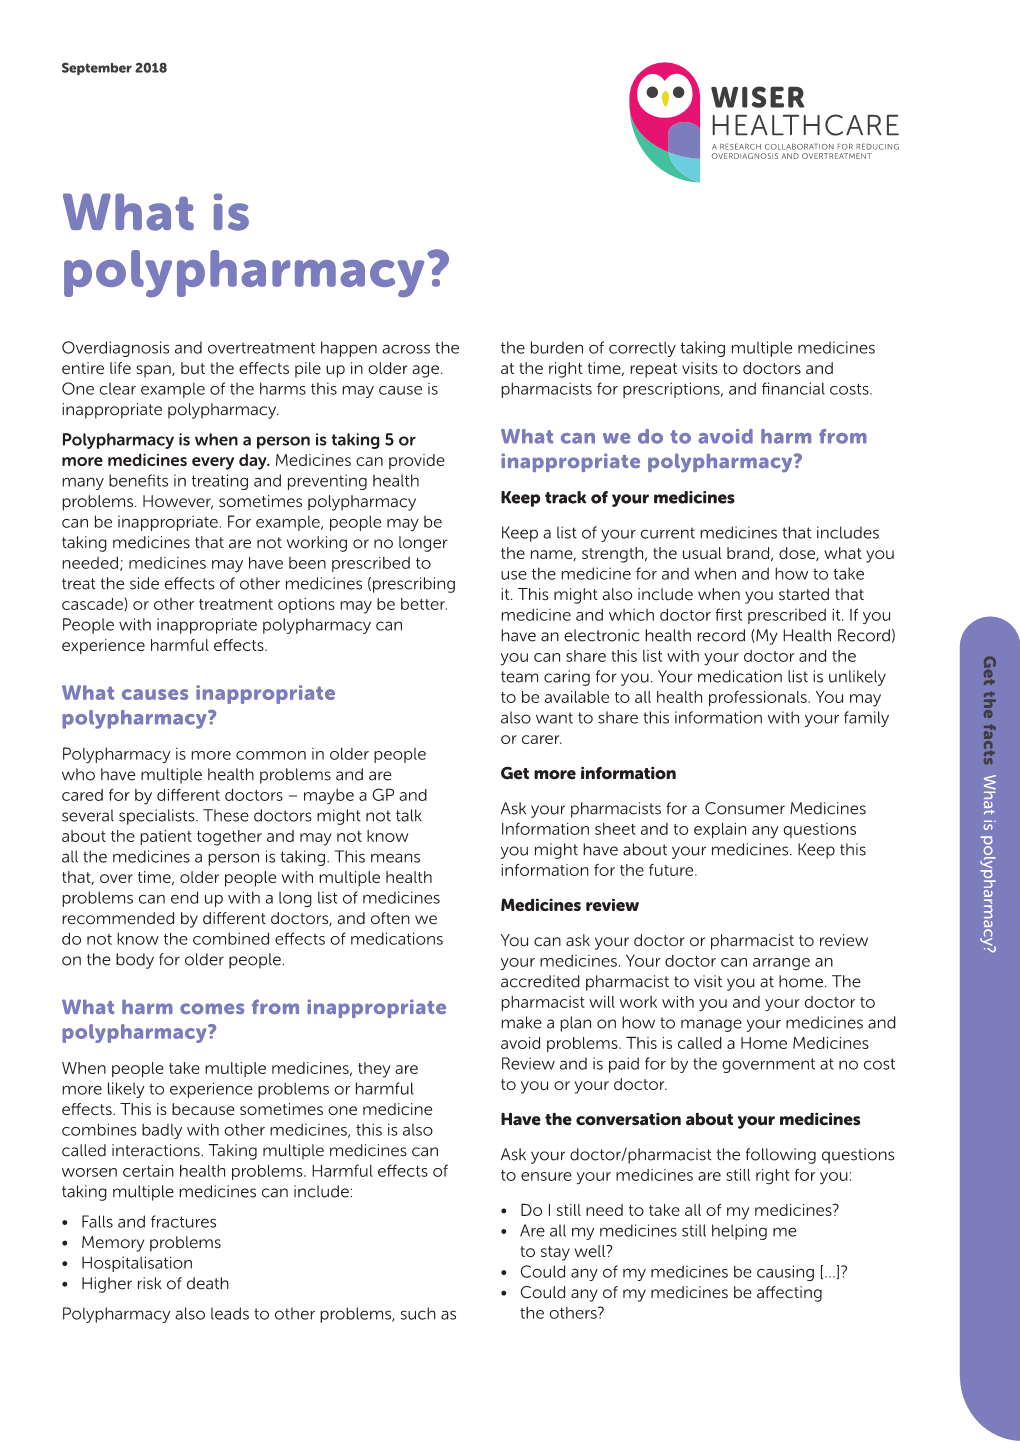 What Is Polypharmacy?